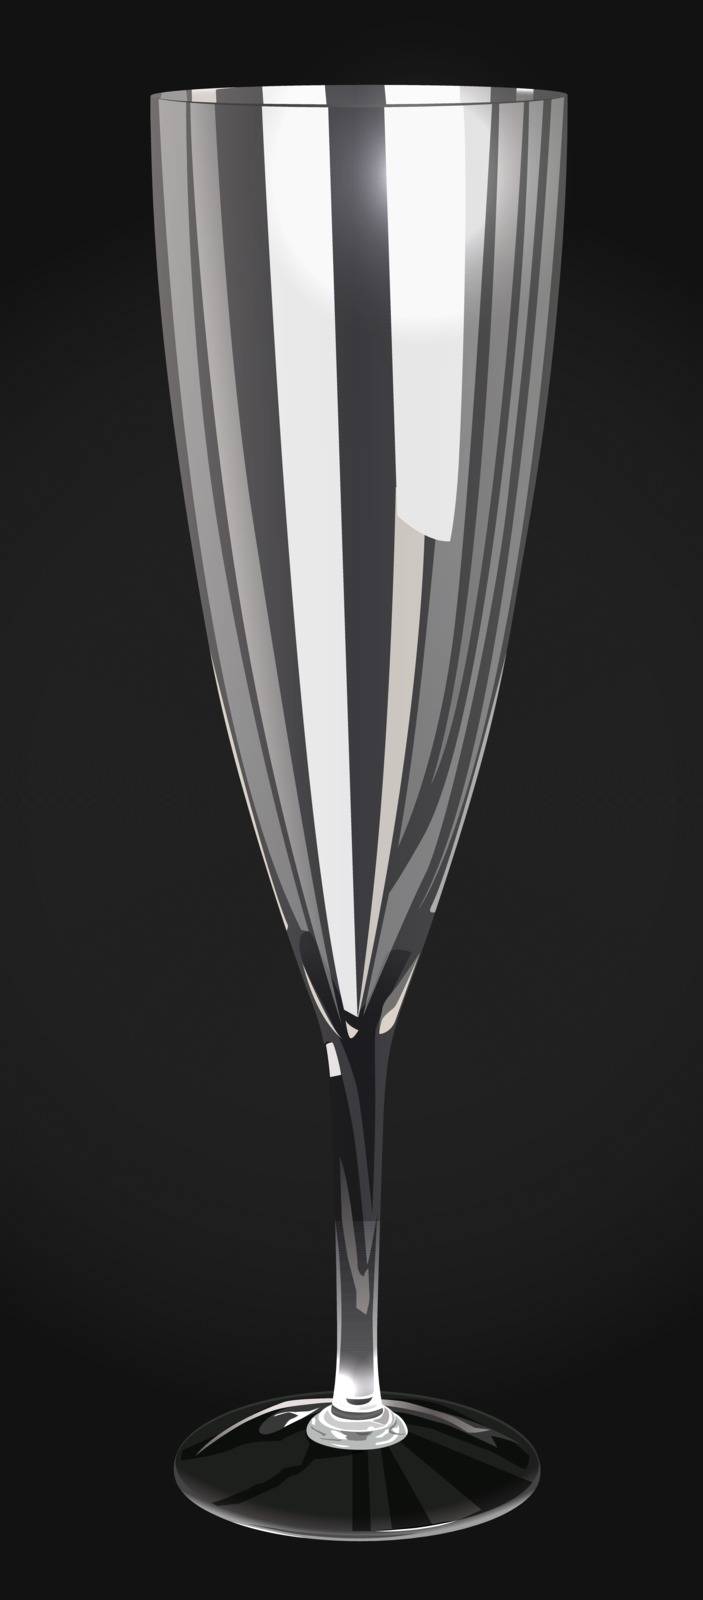 vector champagne glass on dark grey background, eps 10 vector, transparency used